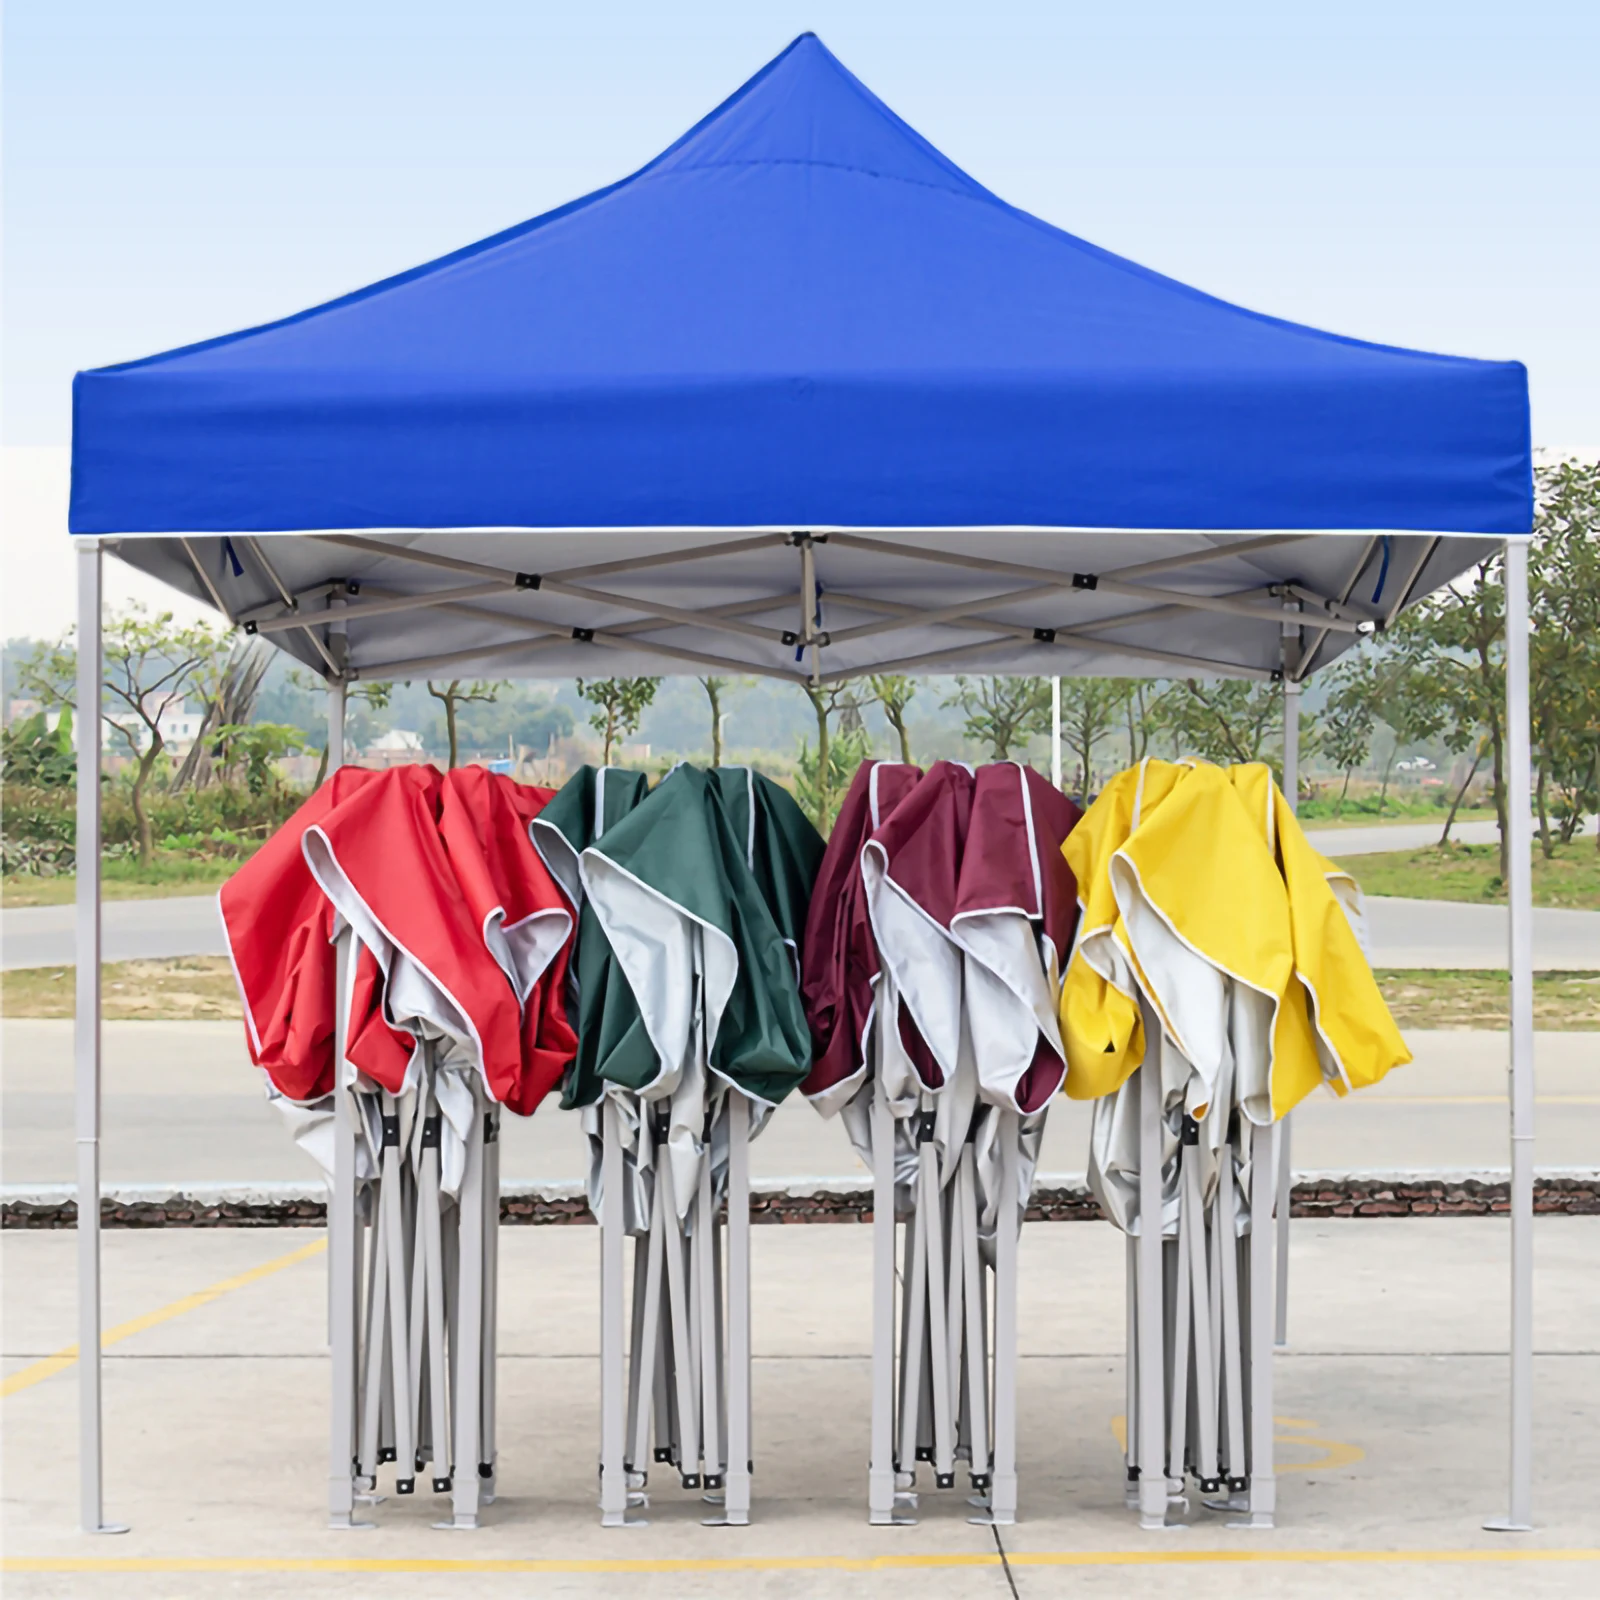 2by2 2by3 3by3meters Aluminum alloy frame Folding tent Pop up tent Gazebo Fast- moving Convenient Awning,carport ,garage, cabana